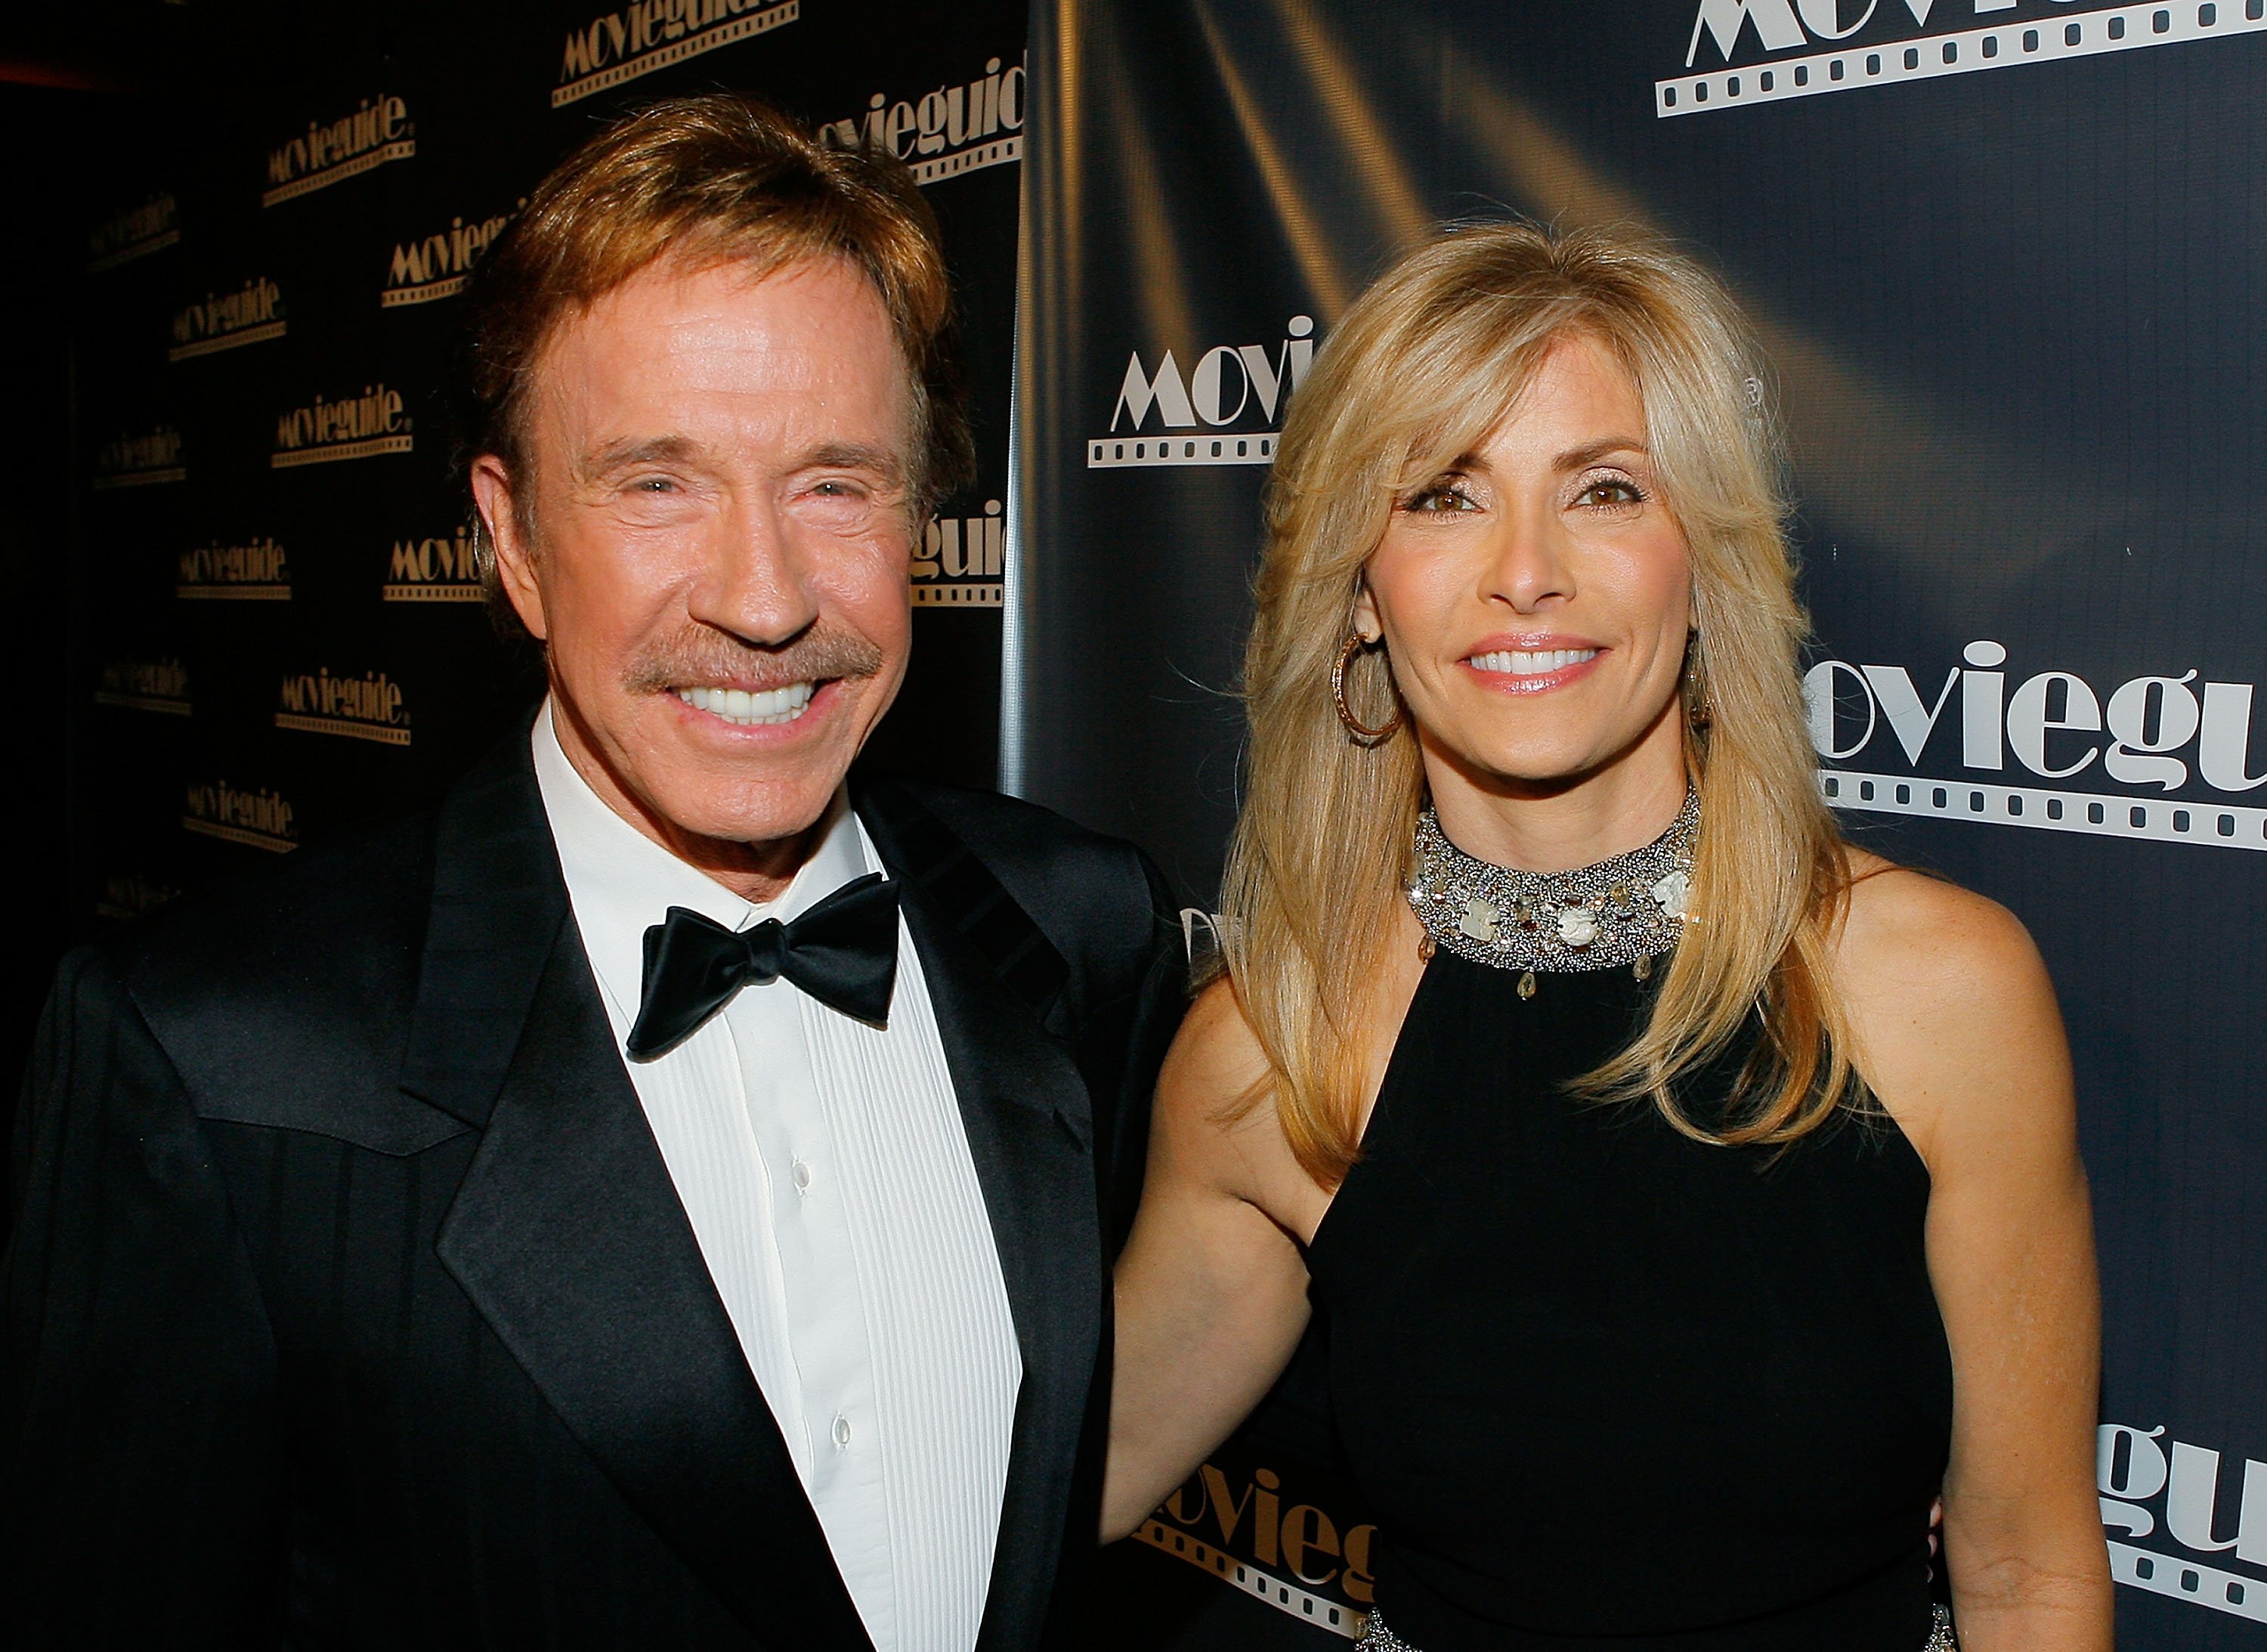 Chuck Norris and wife Gena O'Kelley at the 17th Annual Movieguide Faith and Values Awards at the Beverly Hilton Hotel in Beverly Hills, California | Photo: Vince Bucci/WireImage via Getty Images